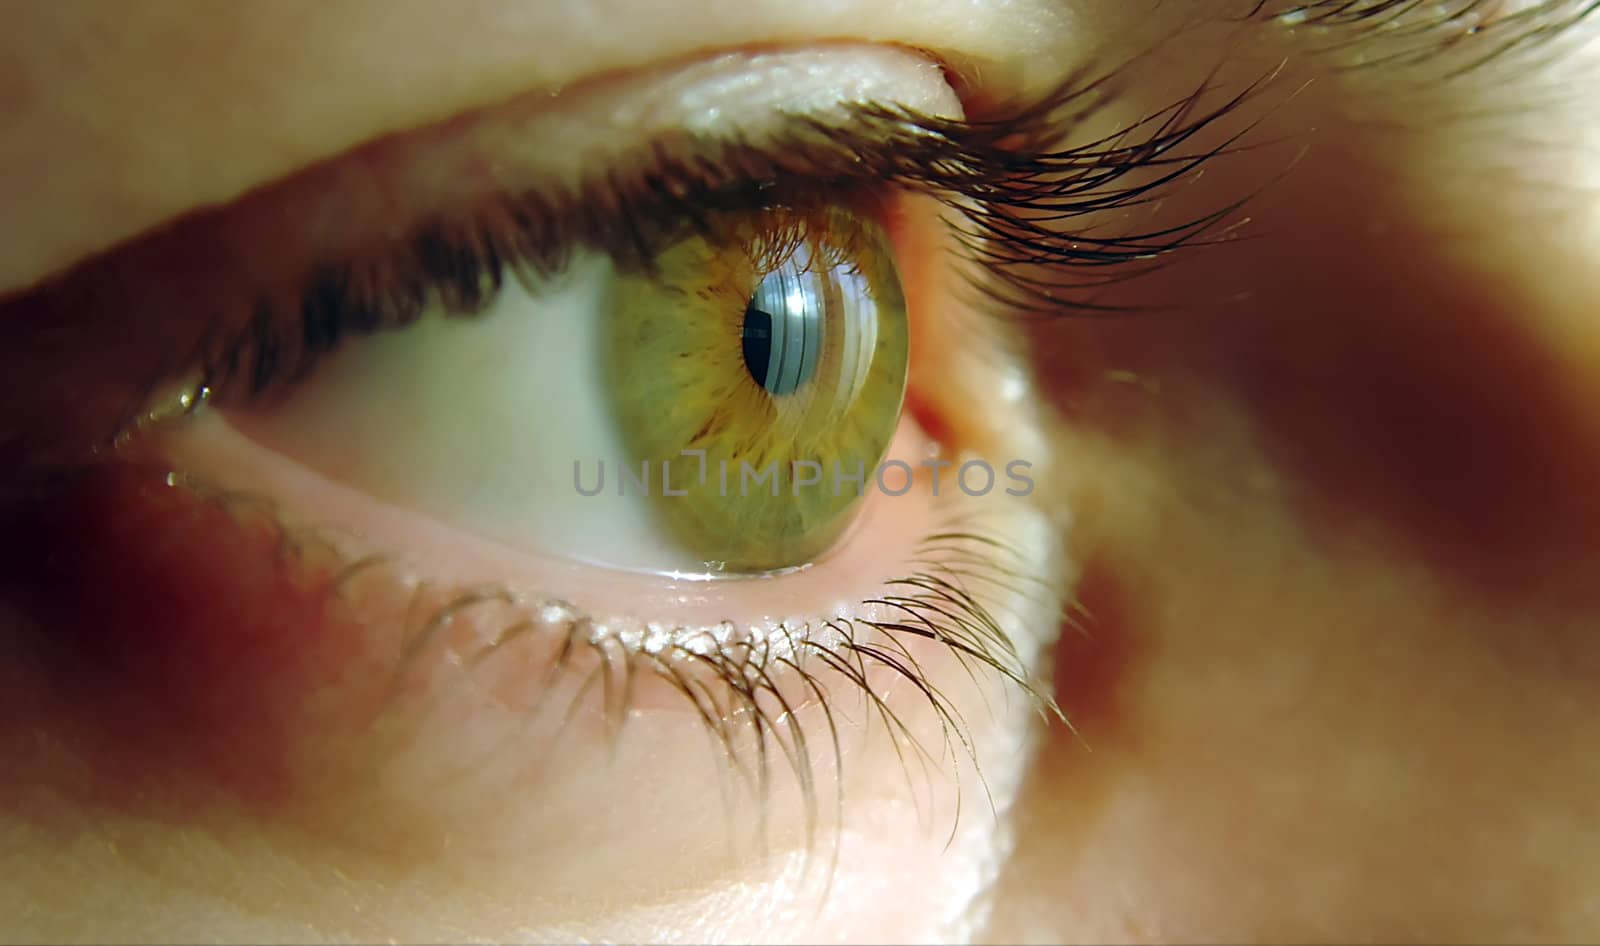 a close-up of a human eye, green color